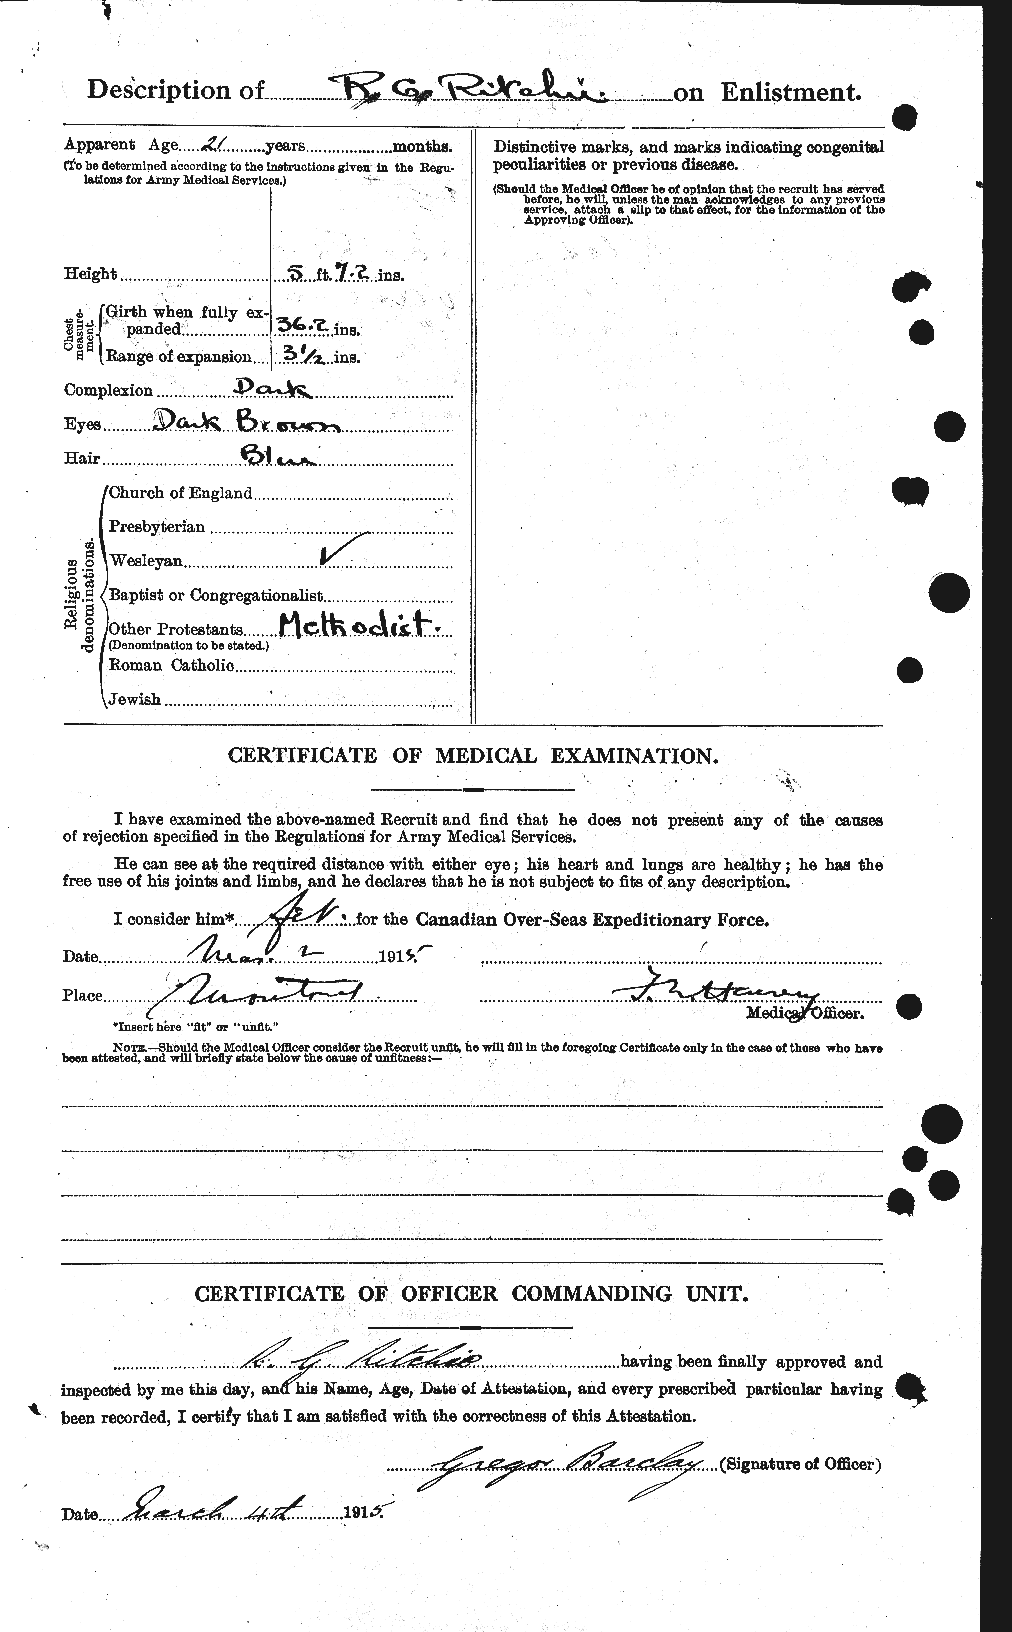 Personnel Records of the First World War - CEF 605377b